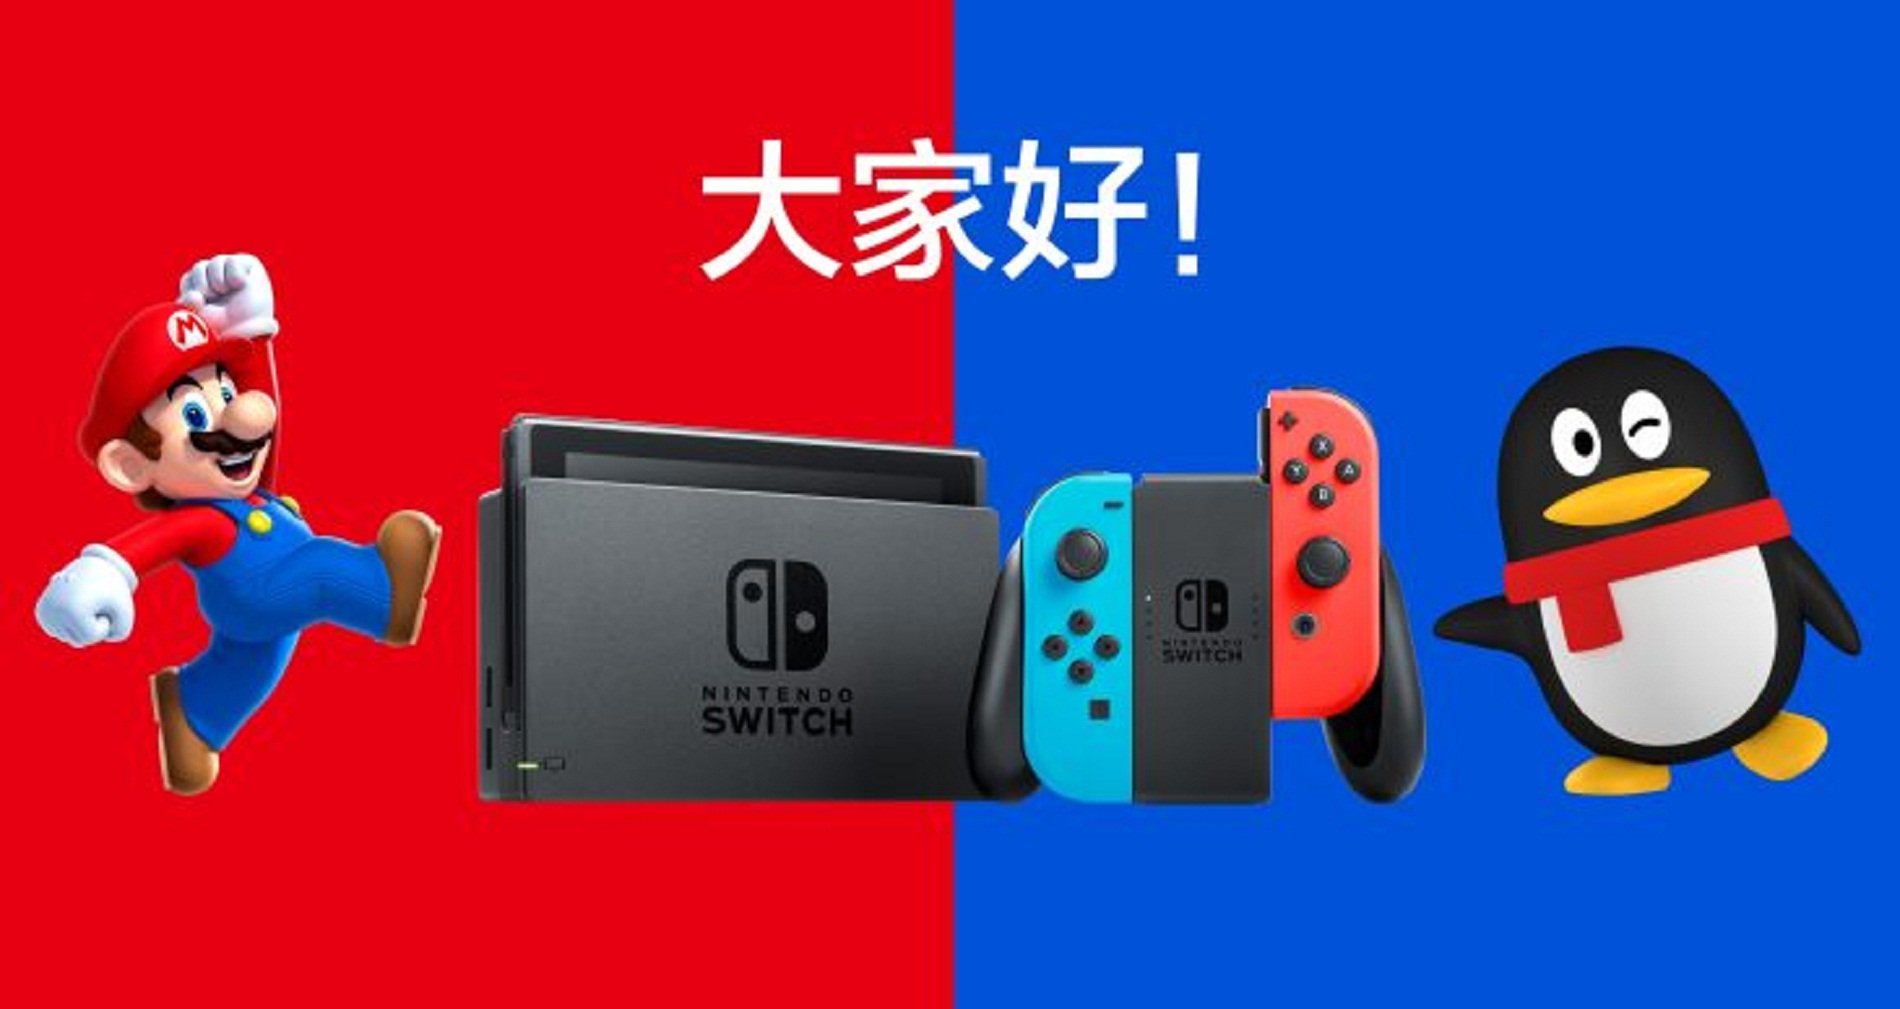 Note: Avoid Importing Nintendo Switch Games From China Due To Tencent Games Region-Locked To Tencent Servers Alone